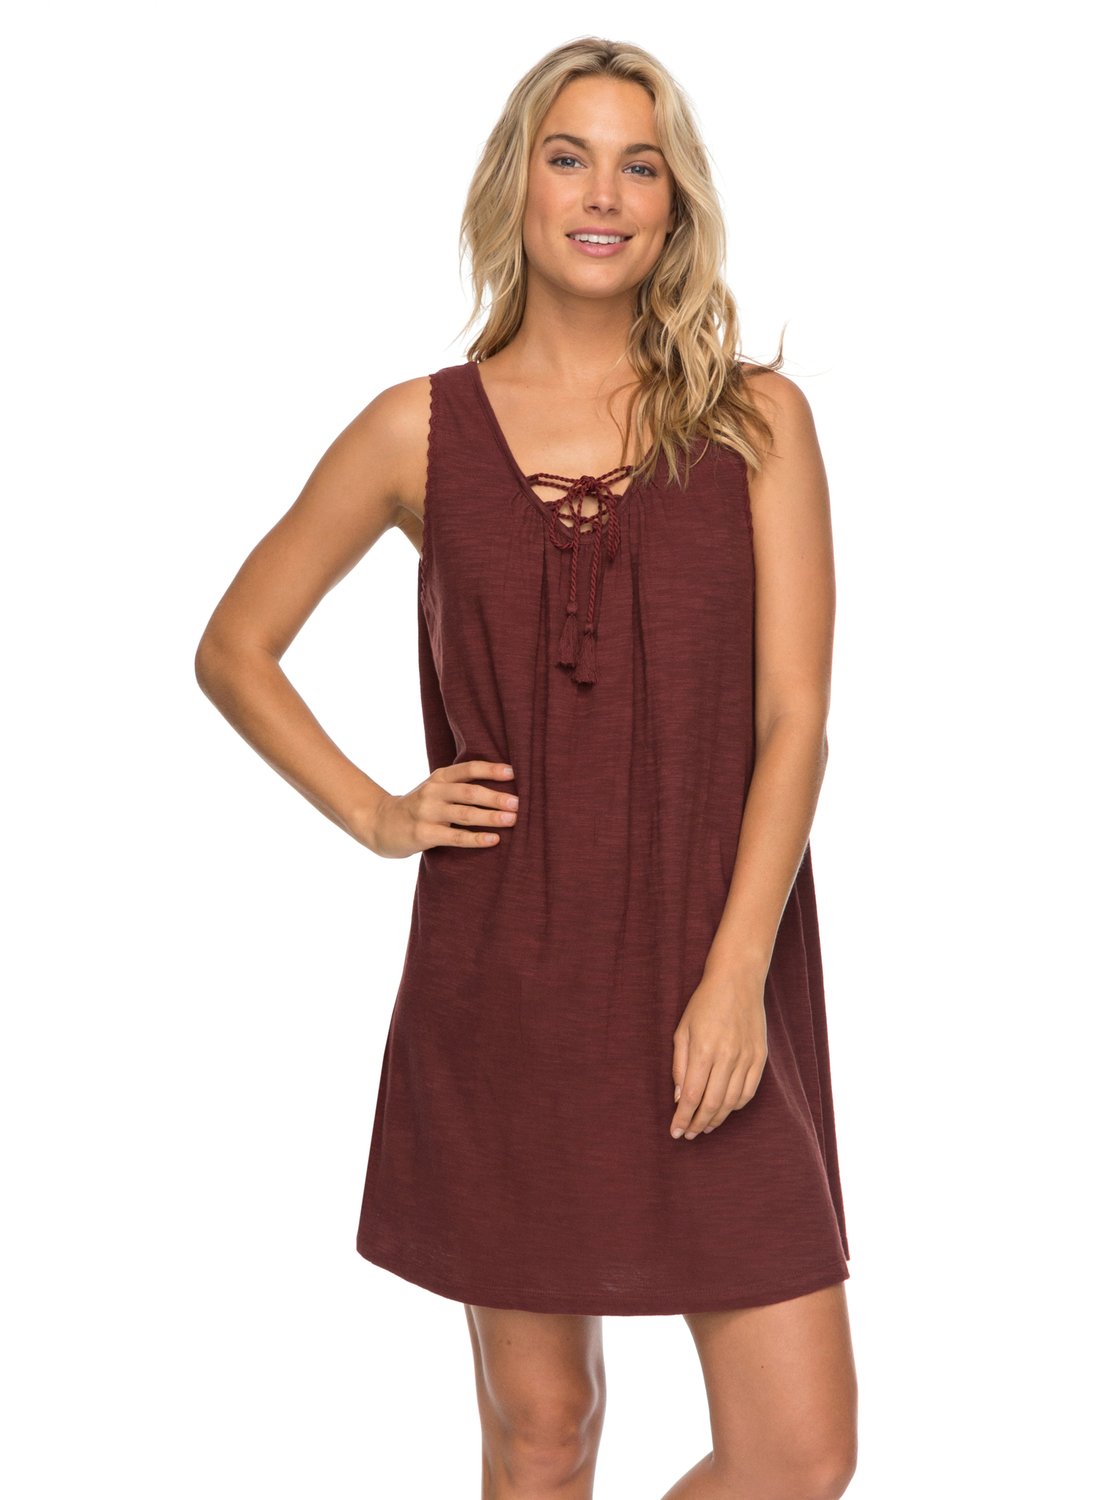 Summer Dresses on sale at 88 Gear